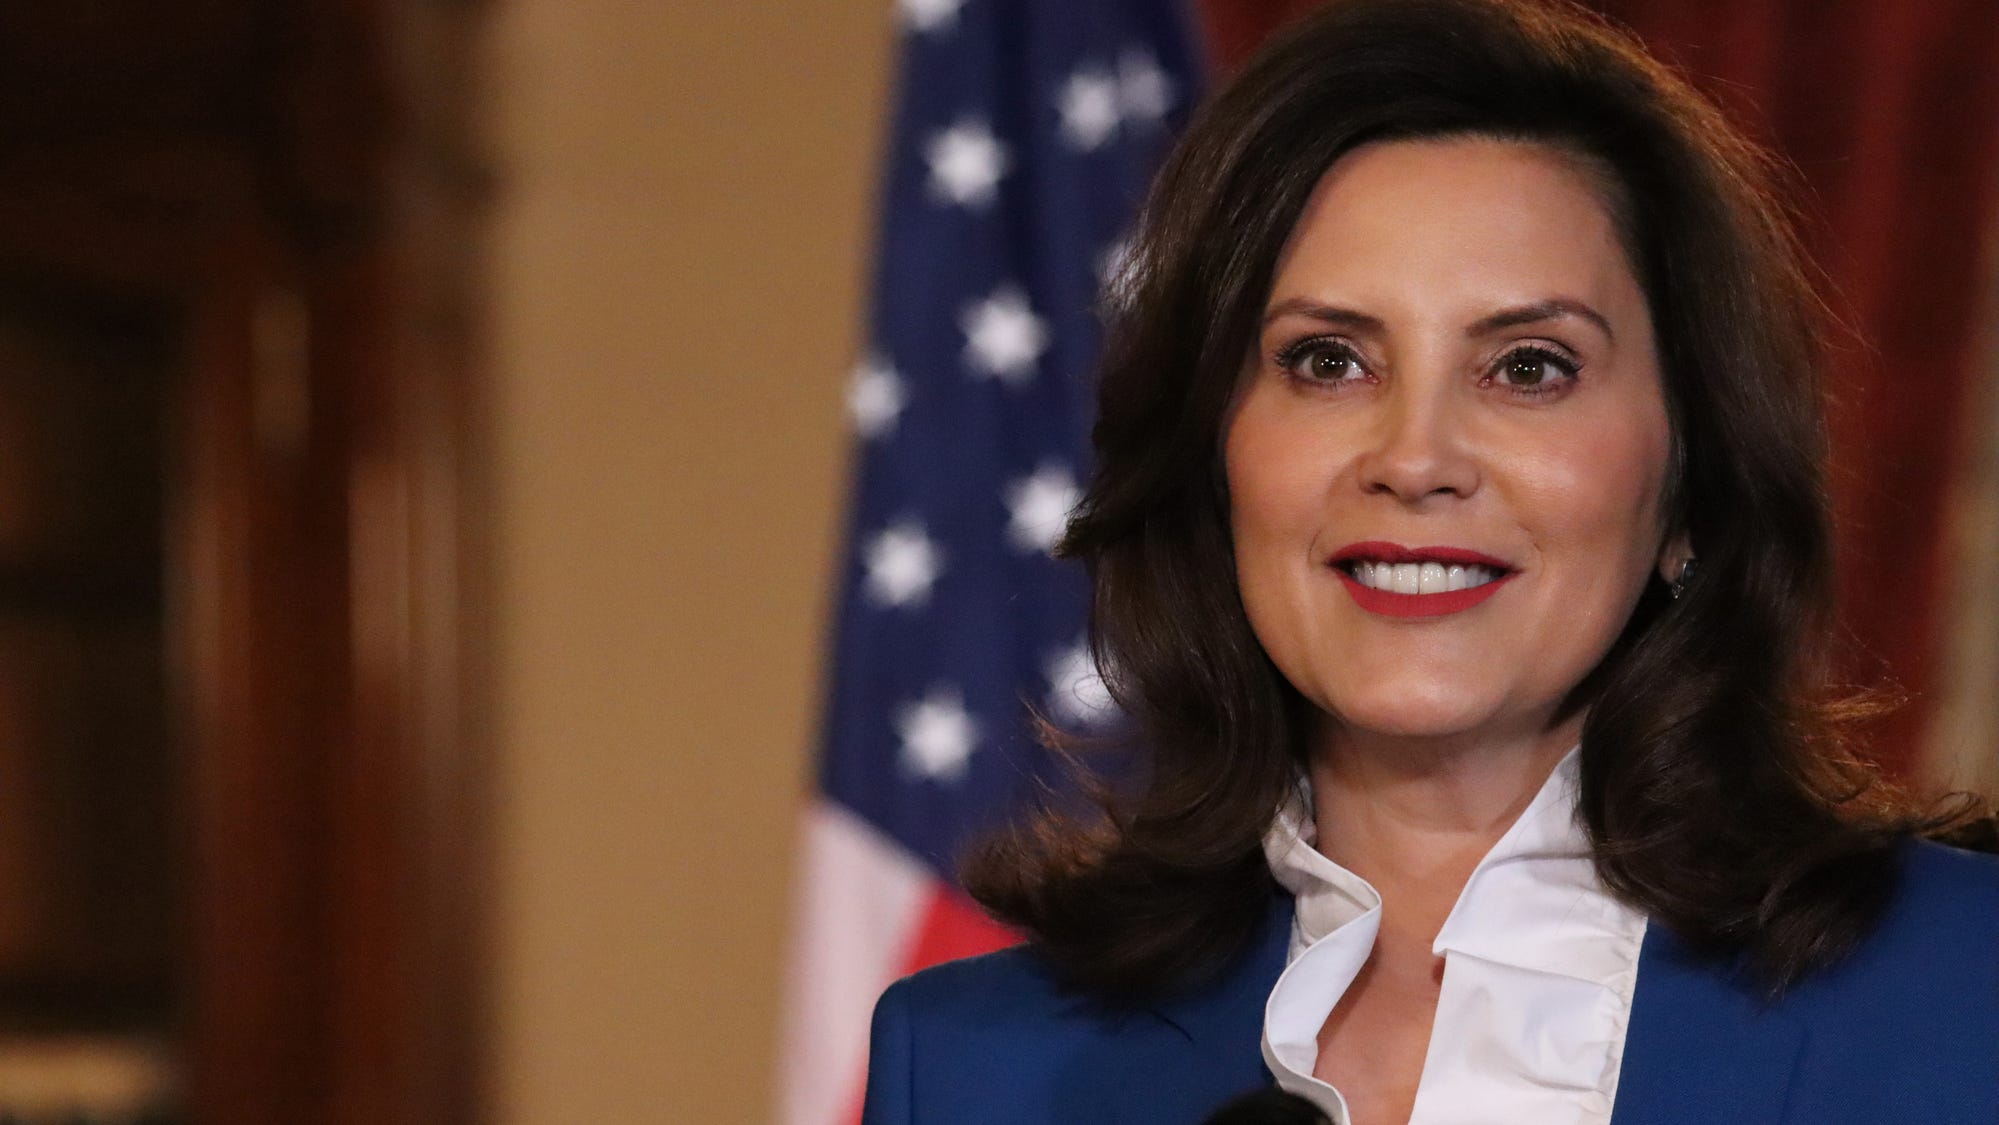 Whitmer has record $3.5M in bank for reelection campaign